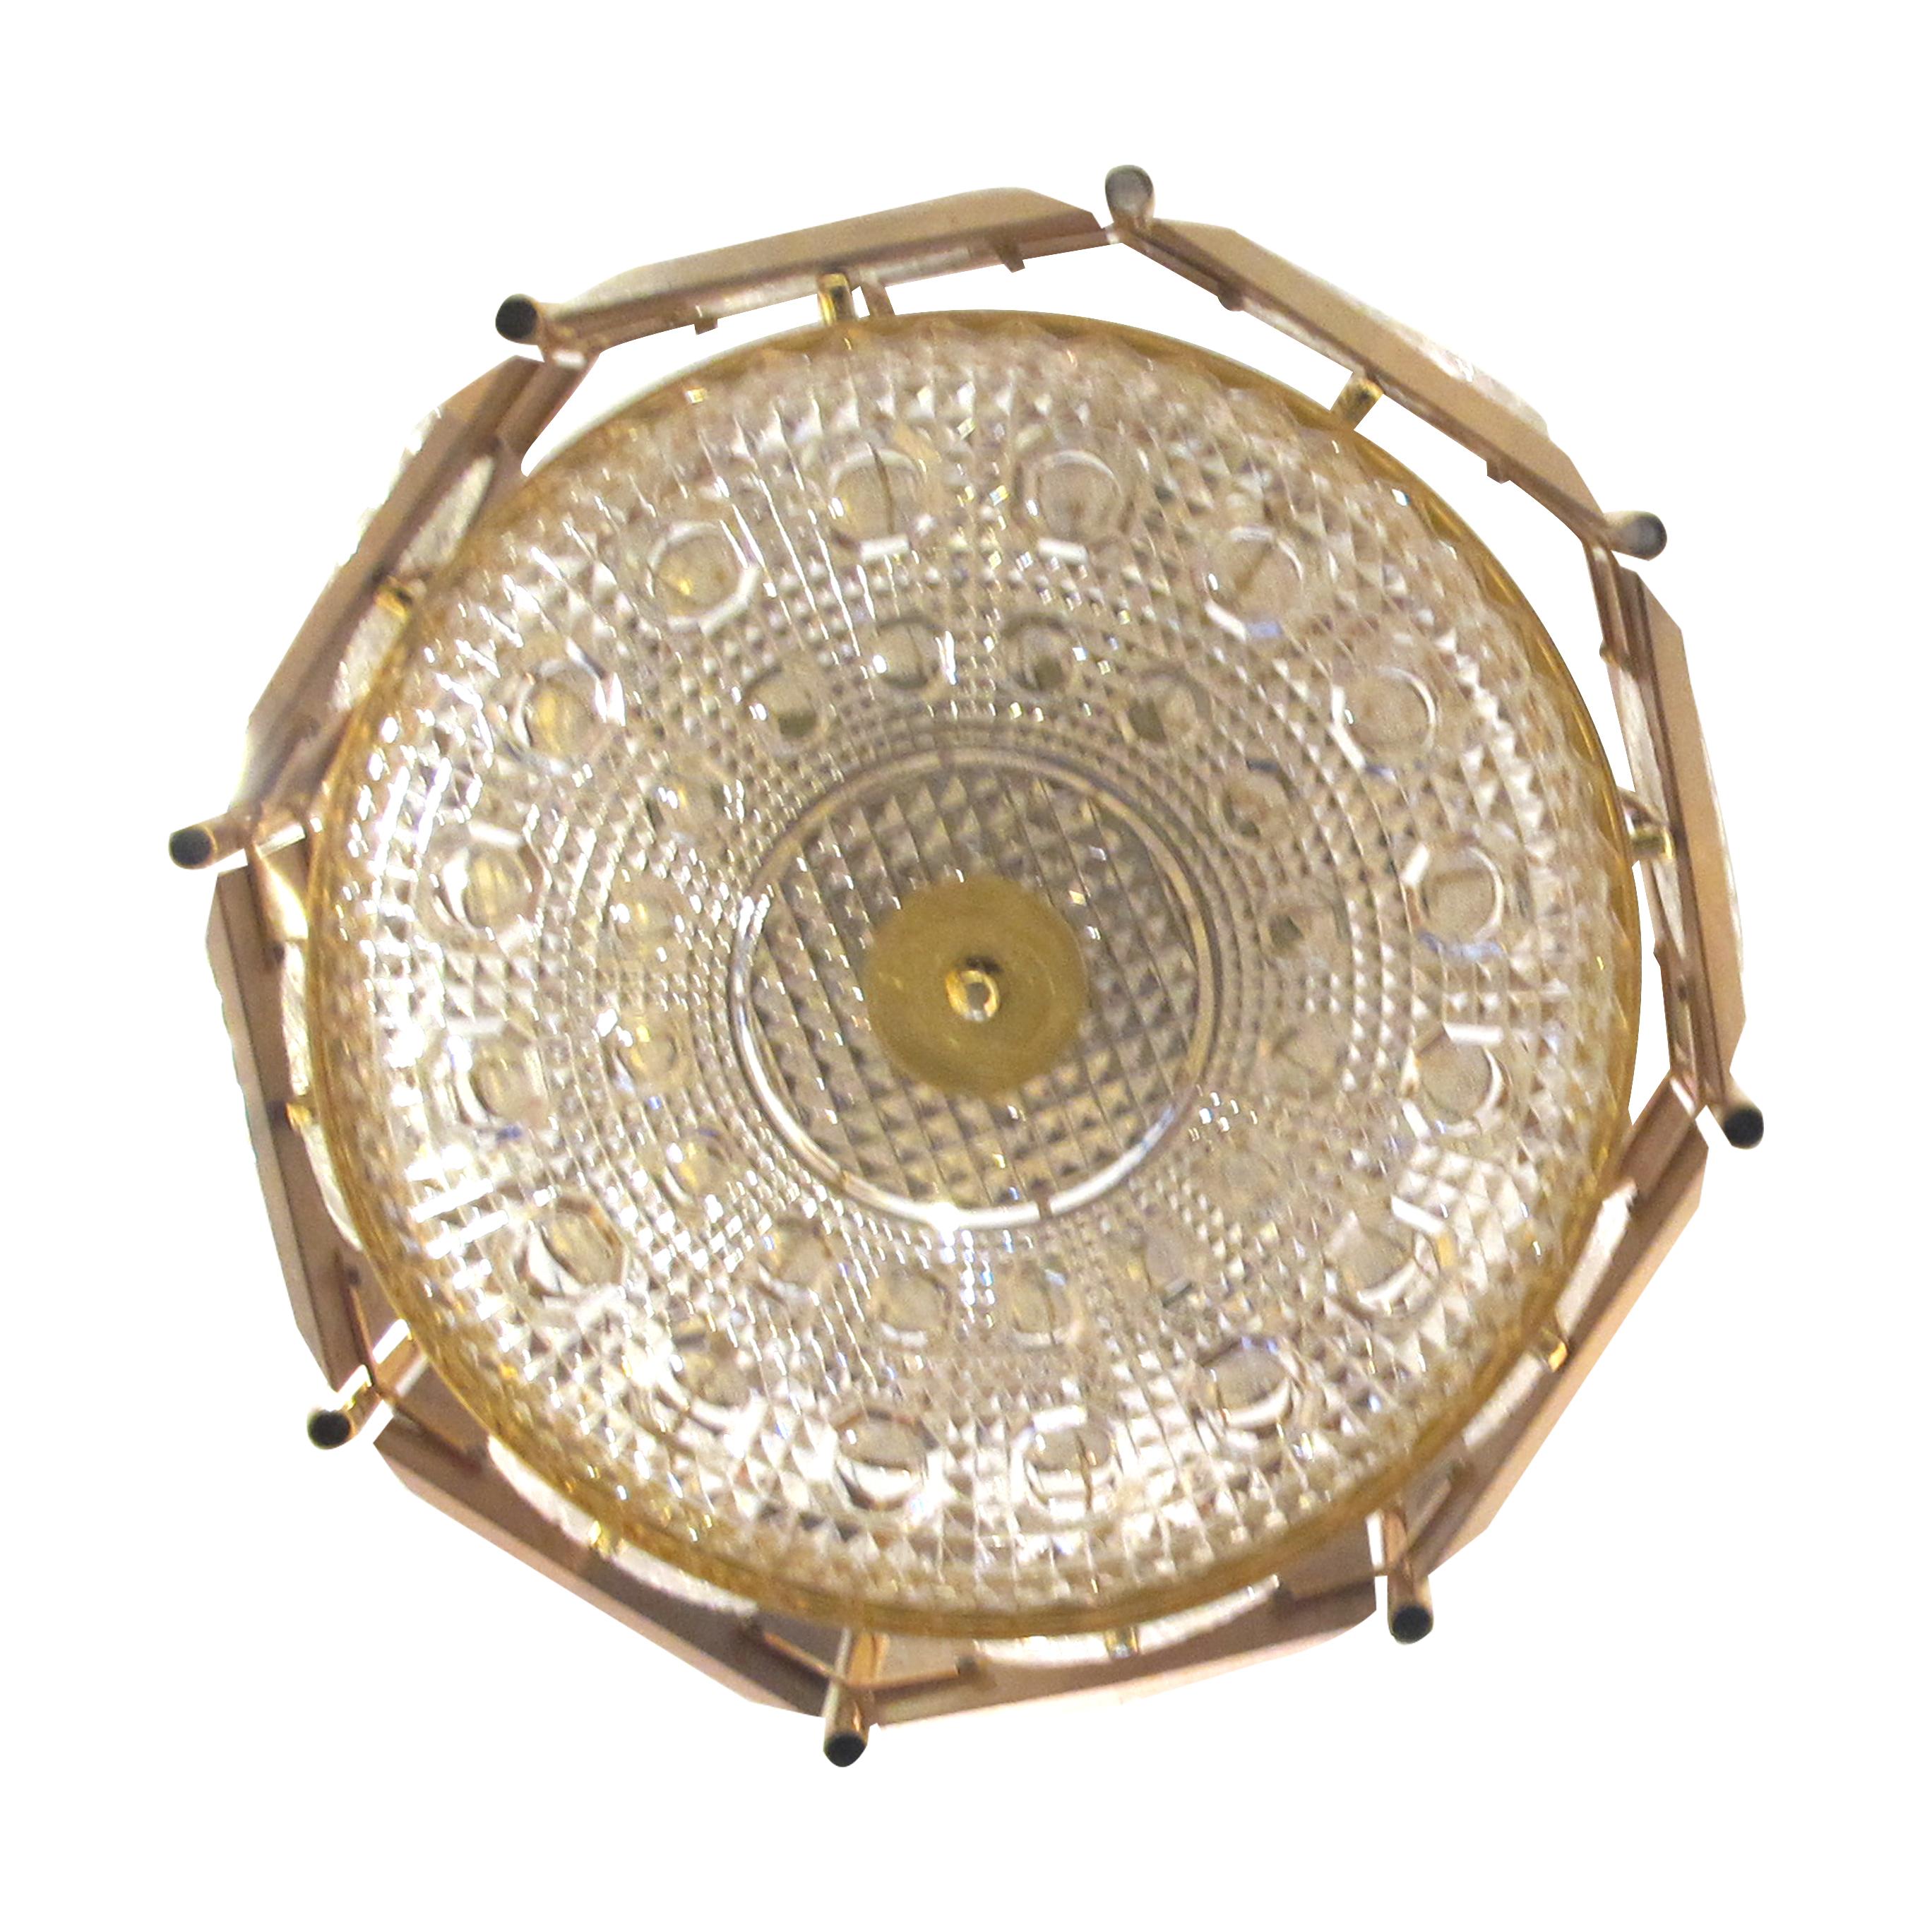 Other 1950s Swedish Circular Brass Ceiling Light with Walnut Frame & Decorative Discs